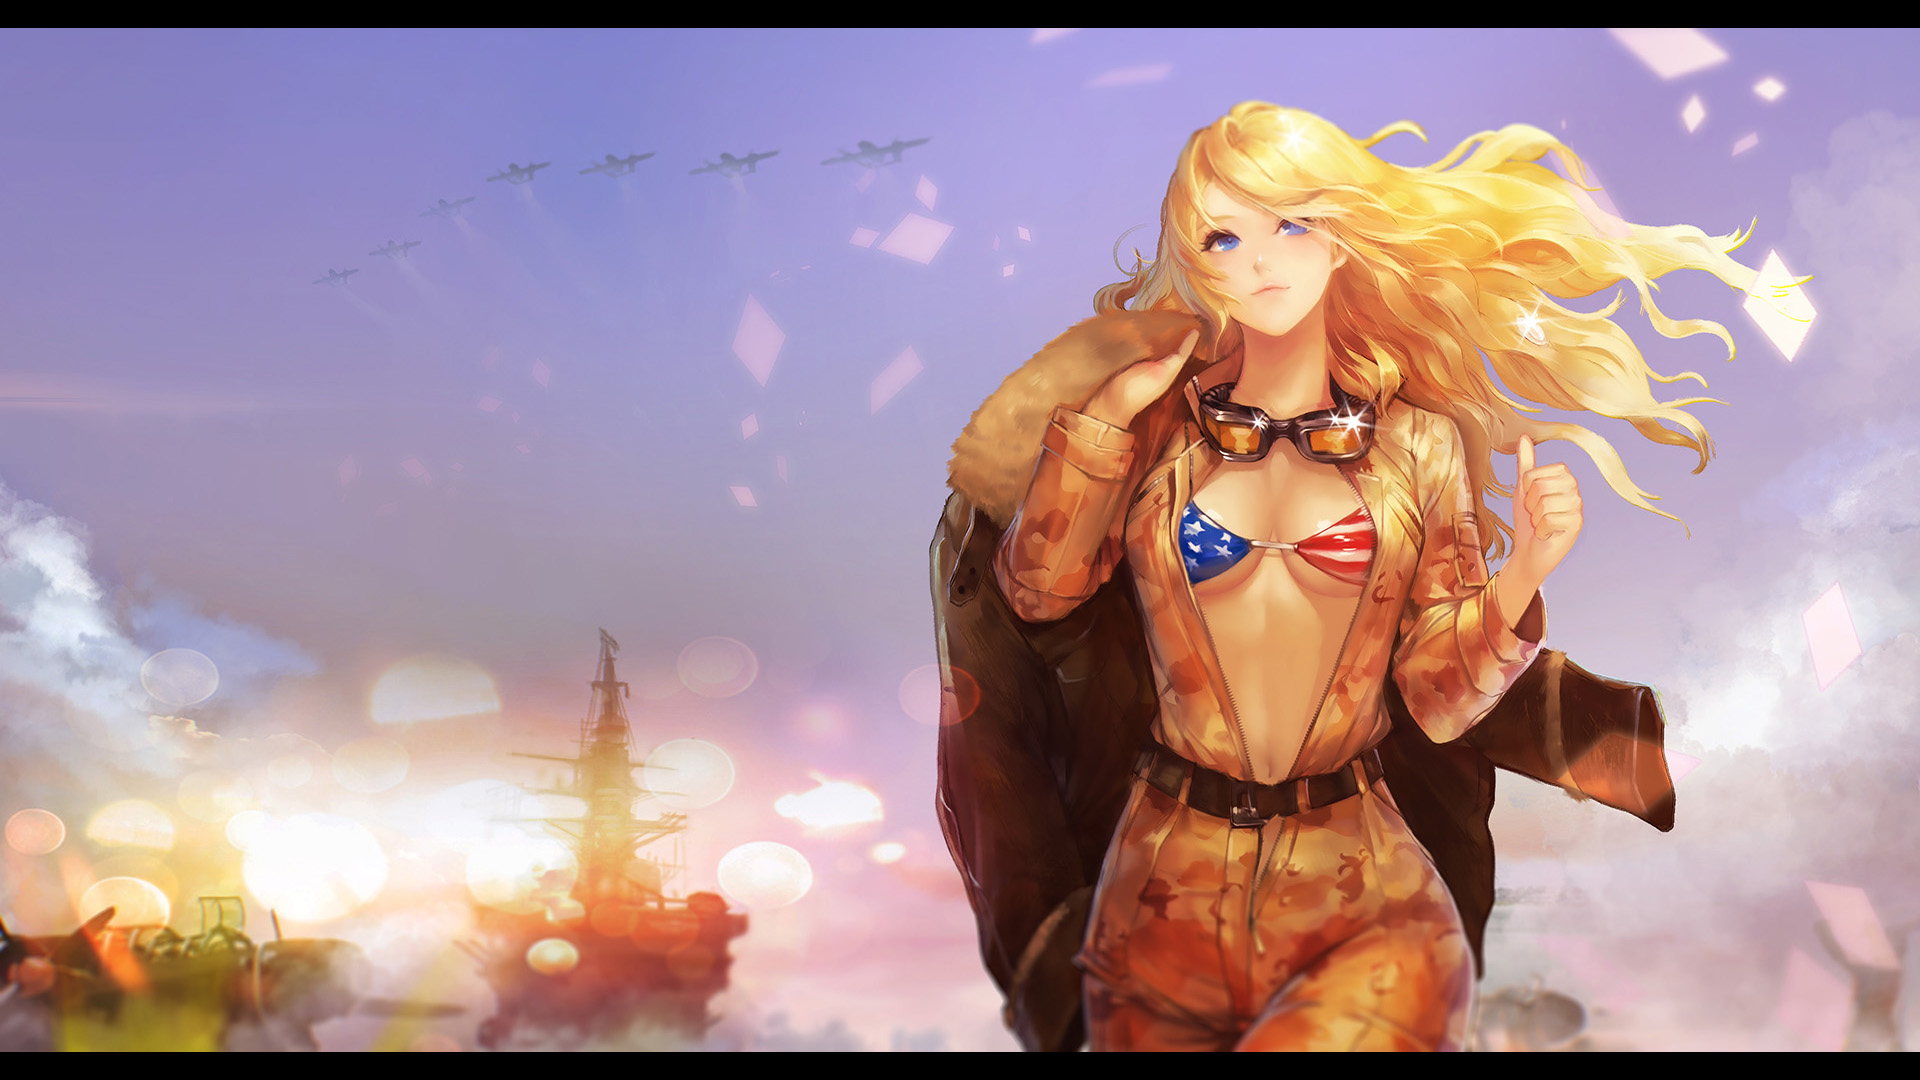 1942 For Kakao Wallpaper 1920x1080, - Anime Soldier Girl Blonde , HD Wallpaper & Backgrounds